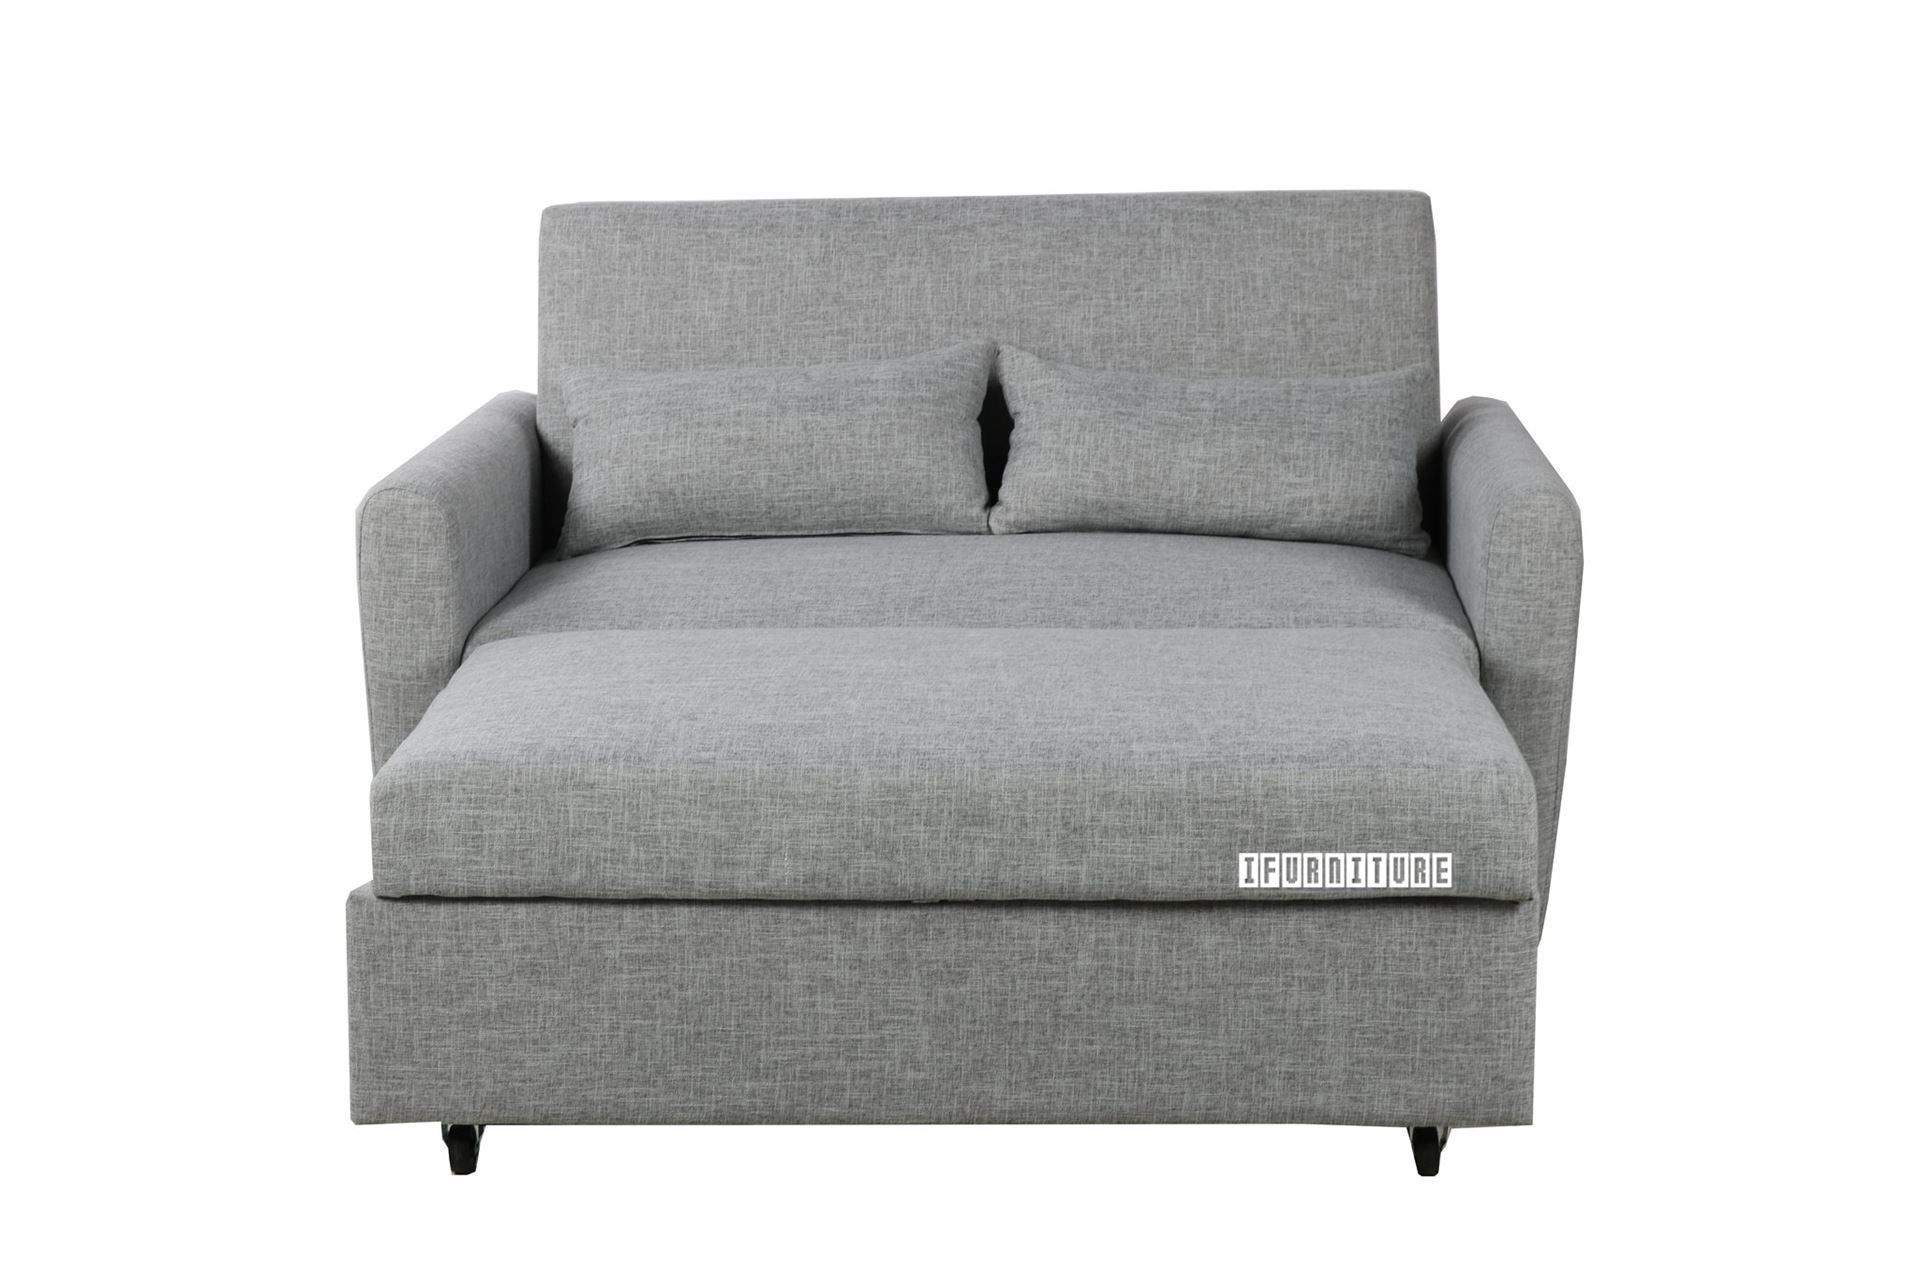 Primo Pull Out 2 Seater Sofa Bed (grey) Pertaining To 2 In 1 Gray Pull Out Sofa Beds (Gallery 4 of 20)